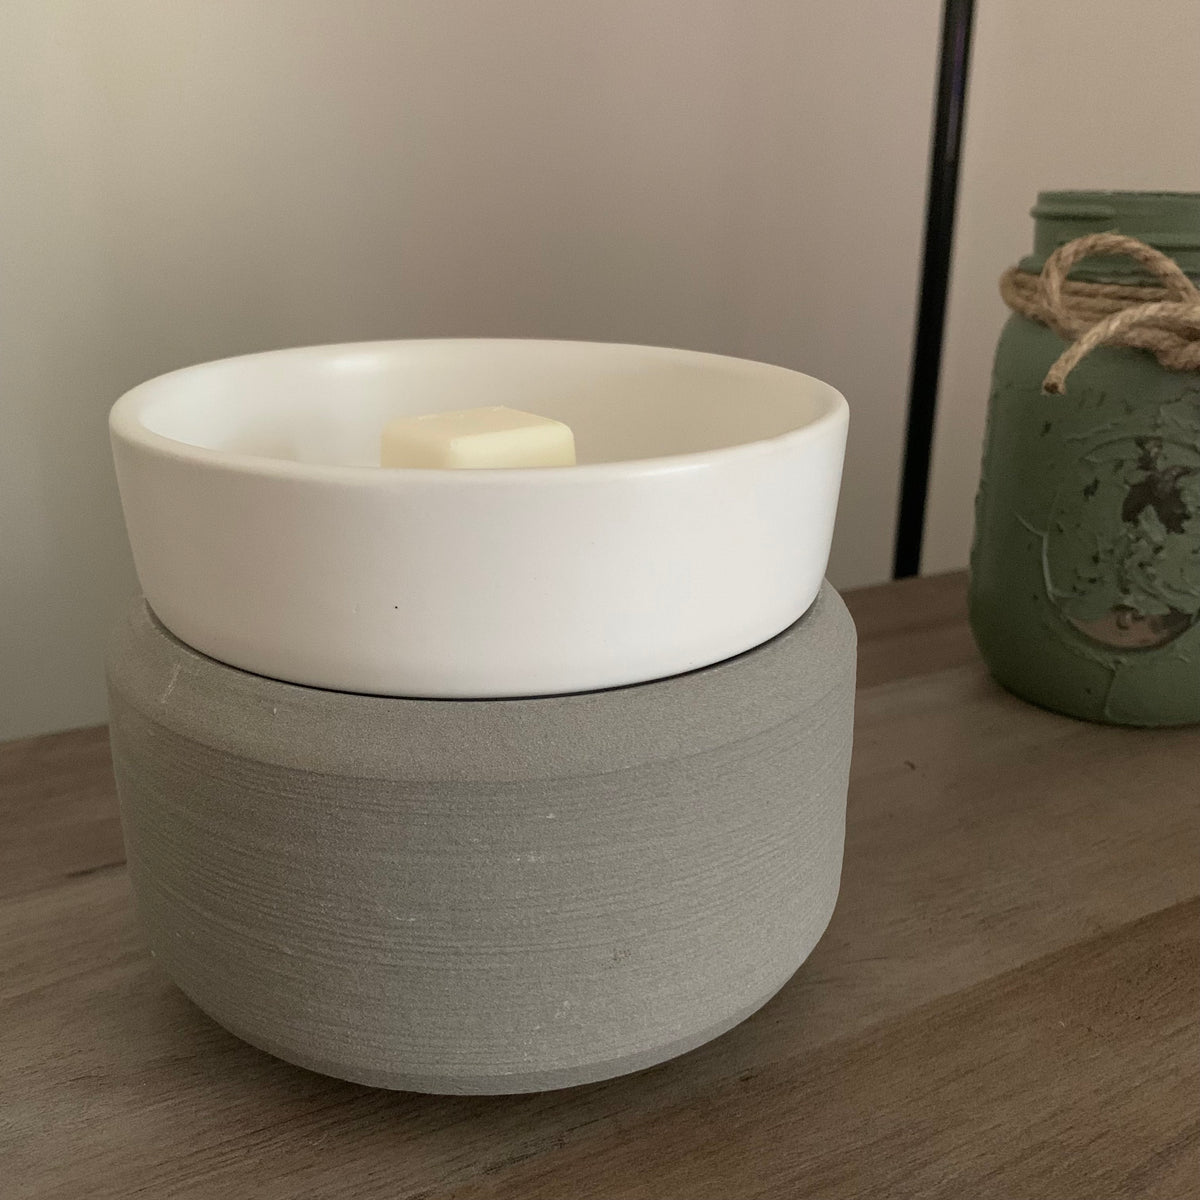 Gray Texture 2-in-1 Wax/Candle Warmer – The Canary's Nest Candle Company